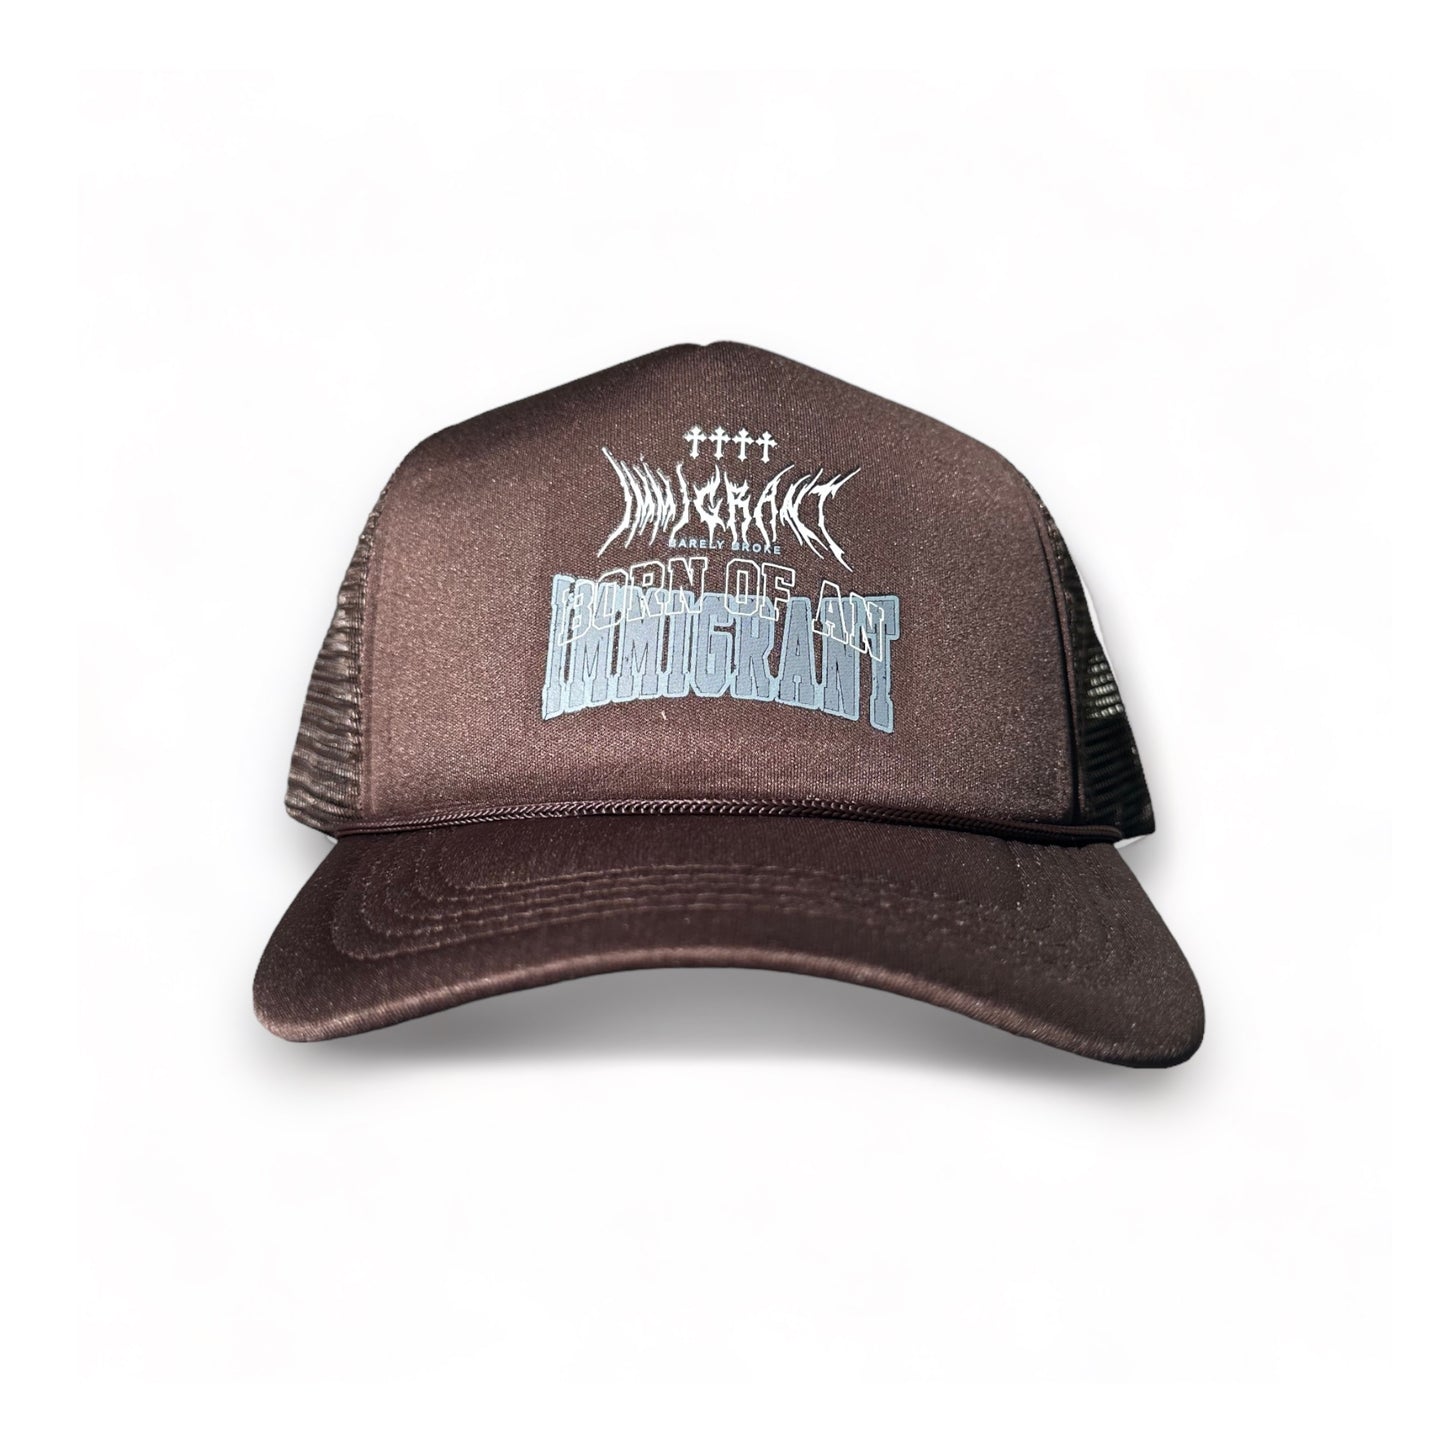 BORN OF AN IMMIGRANT LAST CHAPTER TRUCKER - BROWN